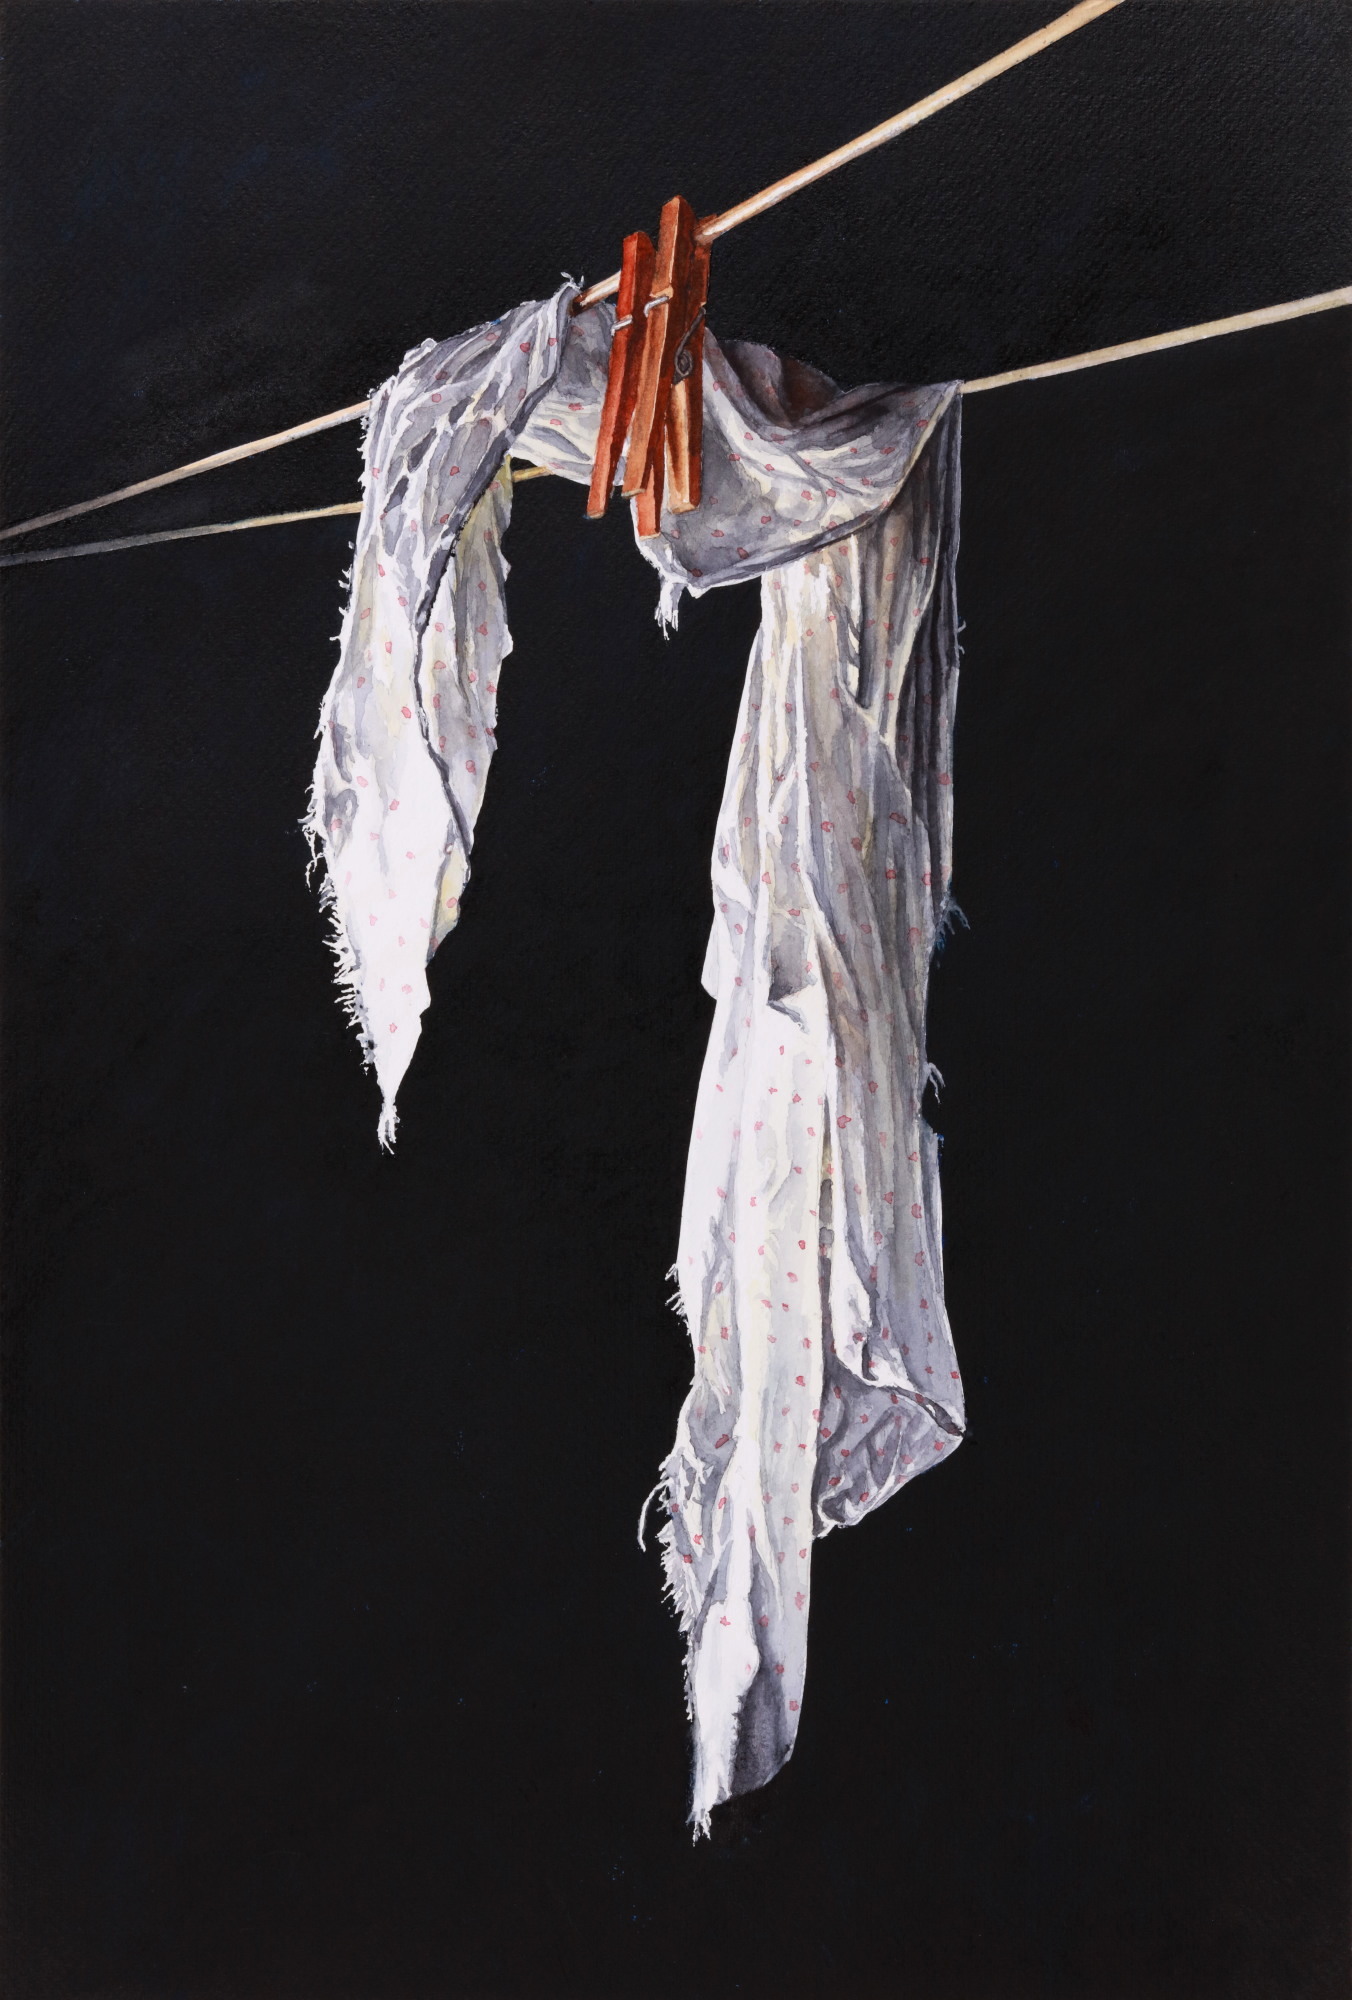 Realism watercolor painting of fabric hanging from a line